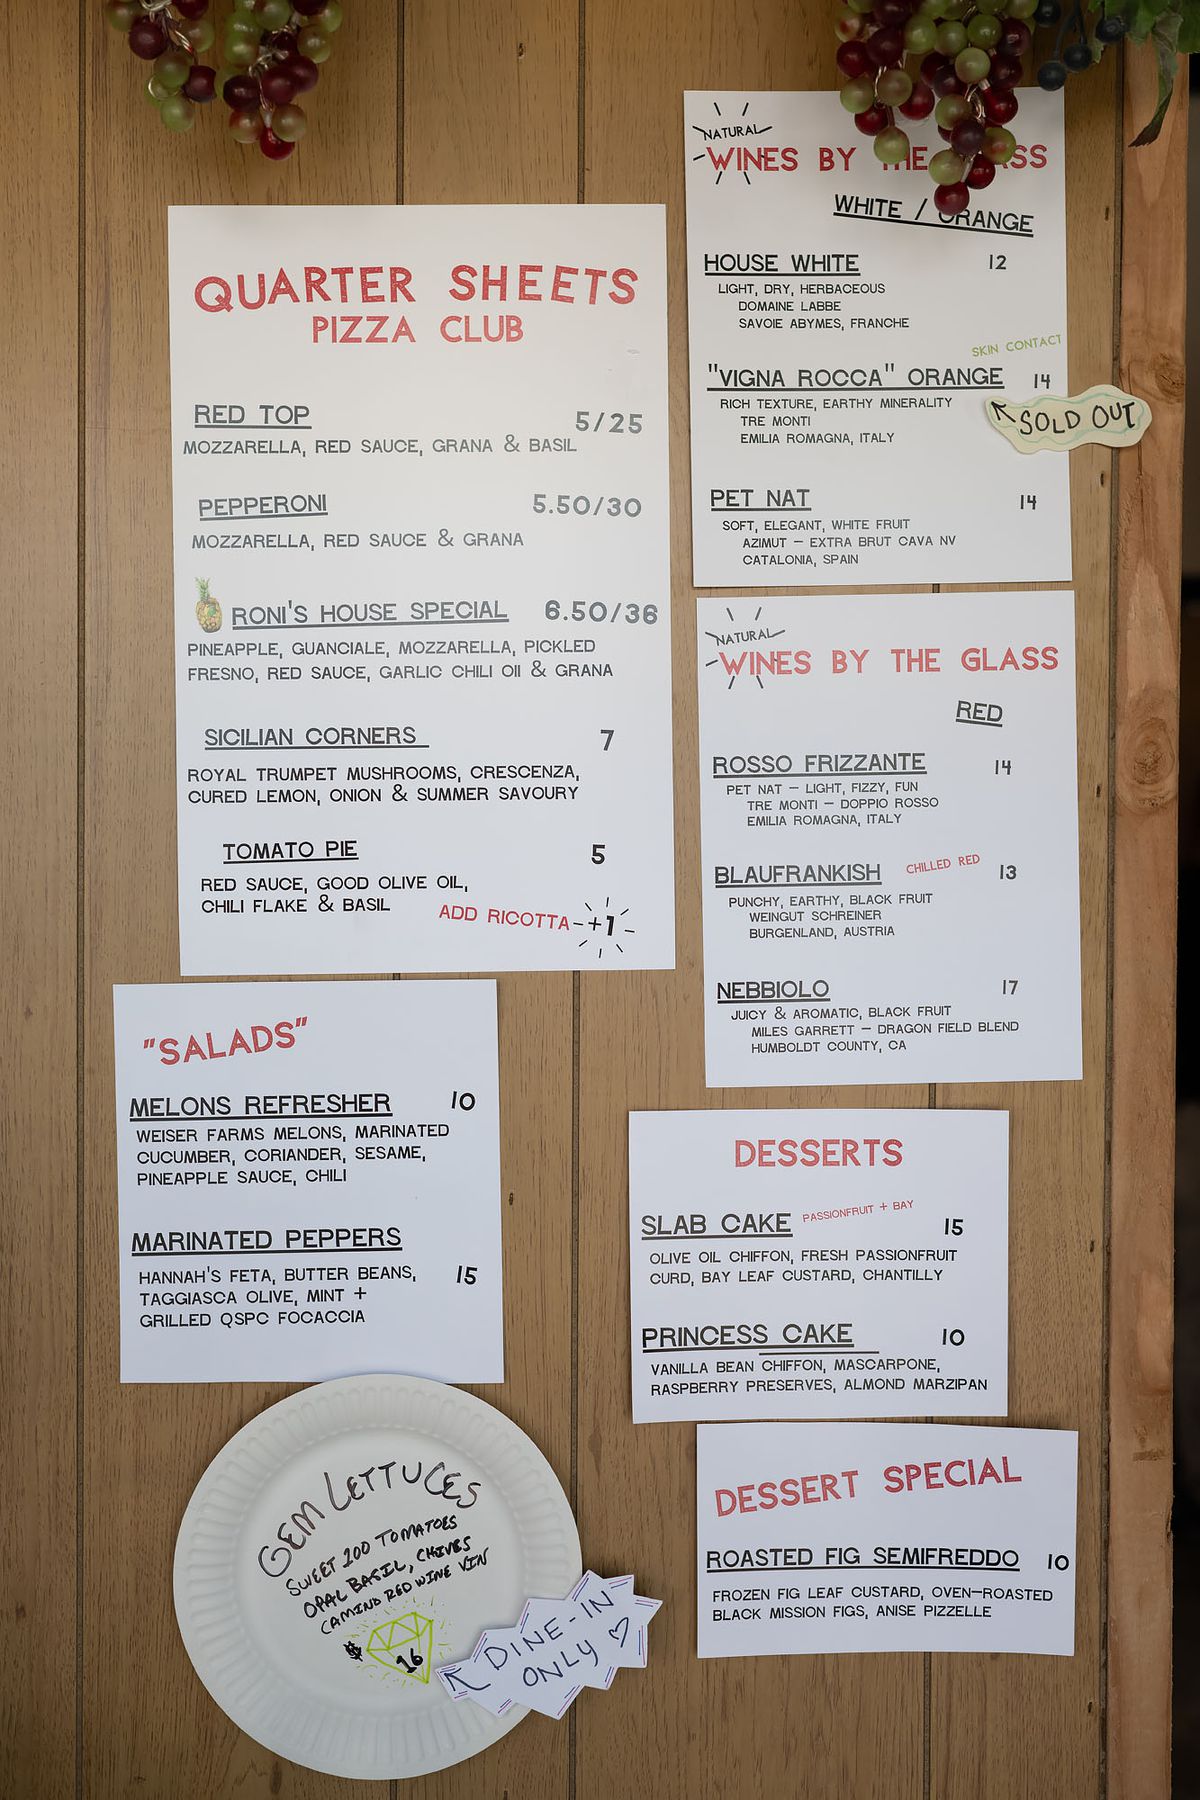 Printed menus hanging on a wooden wall.